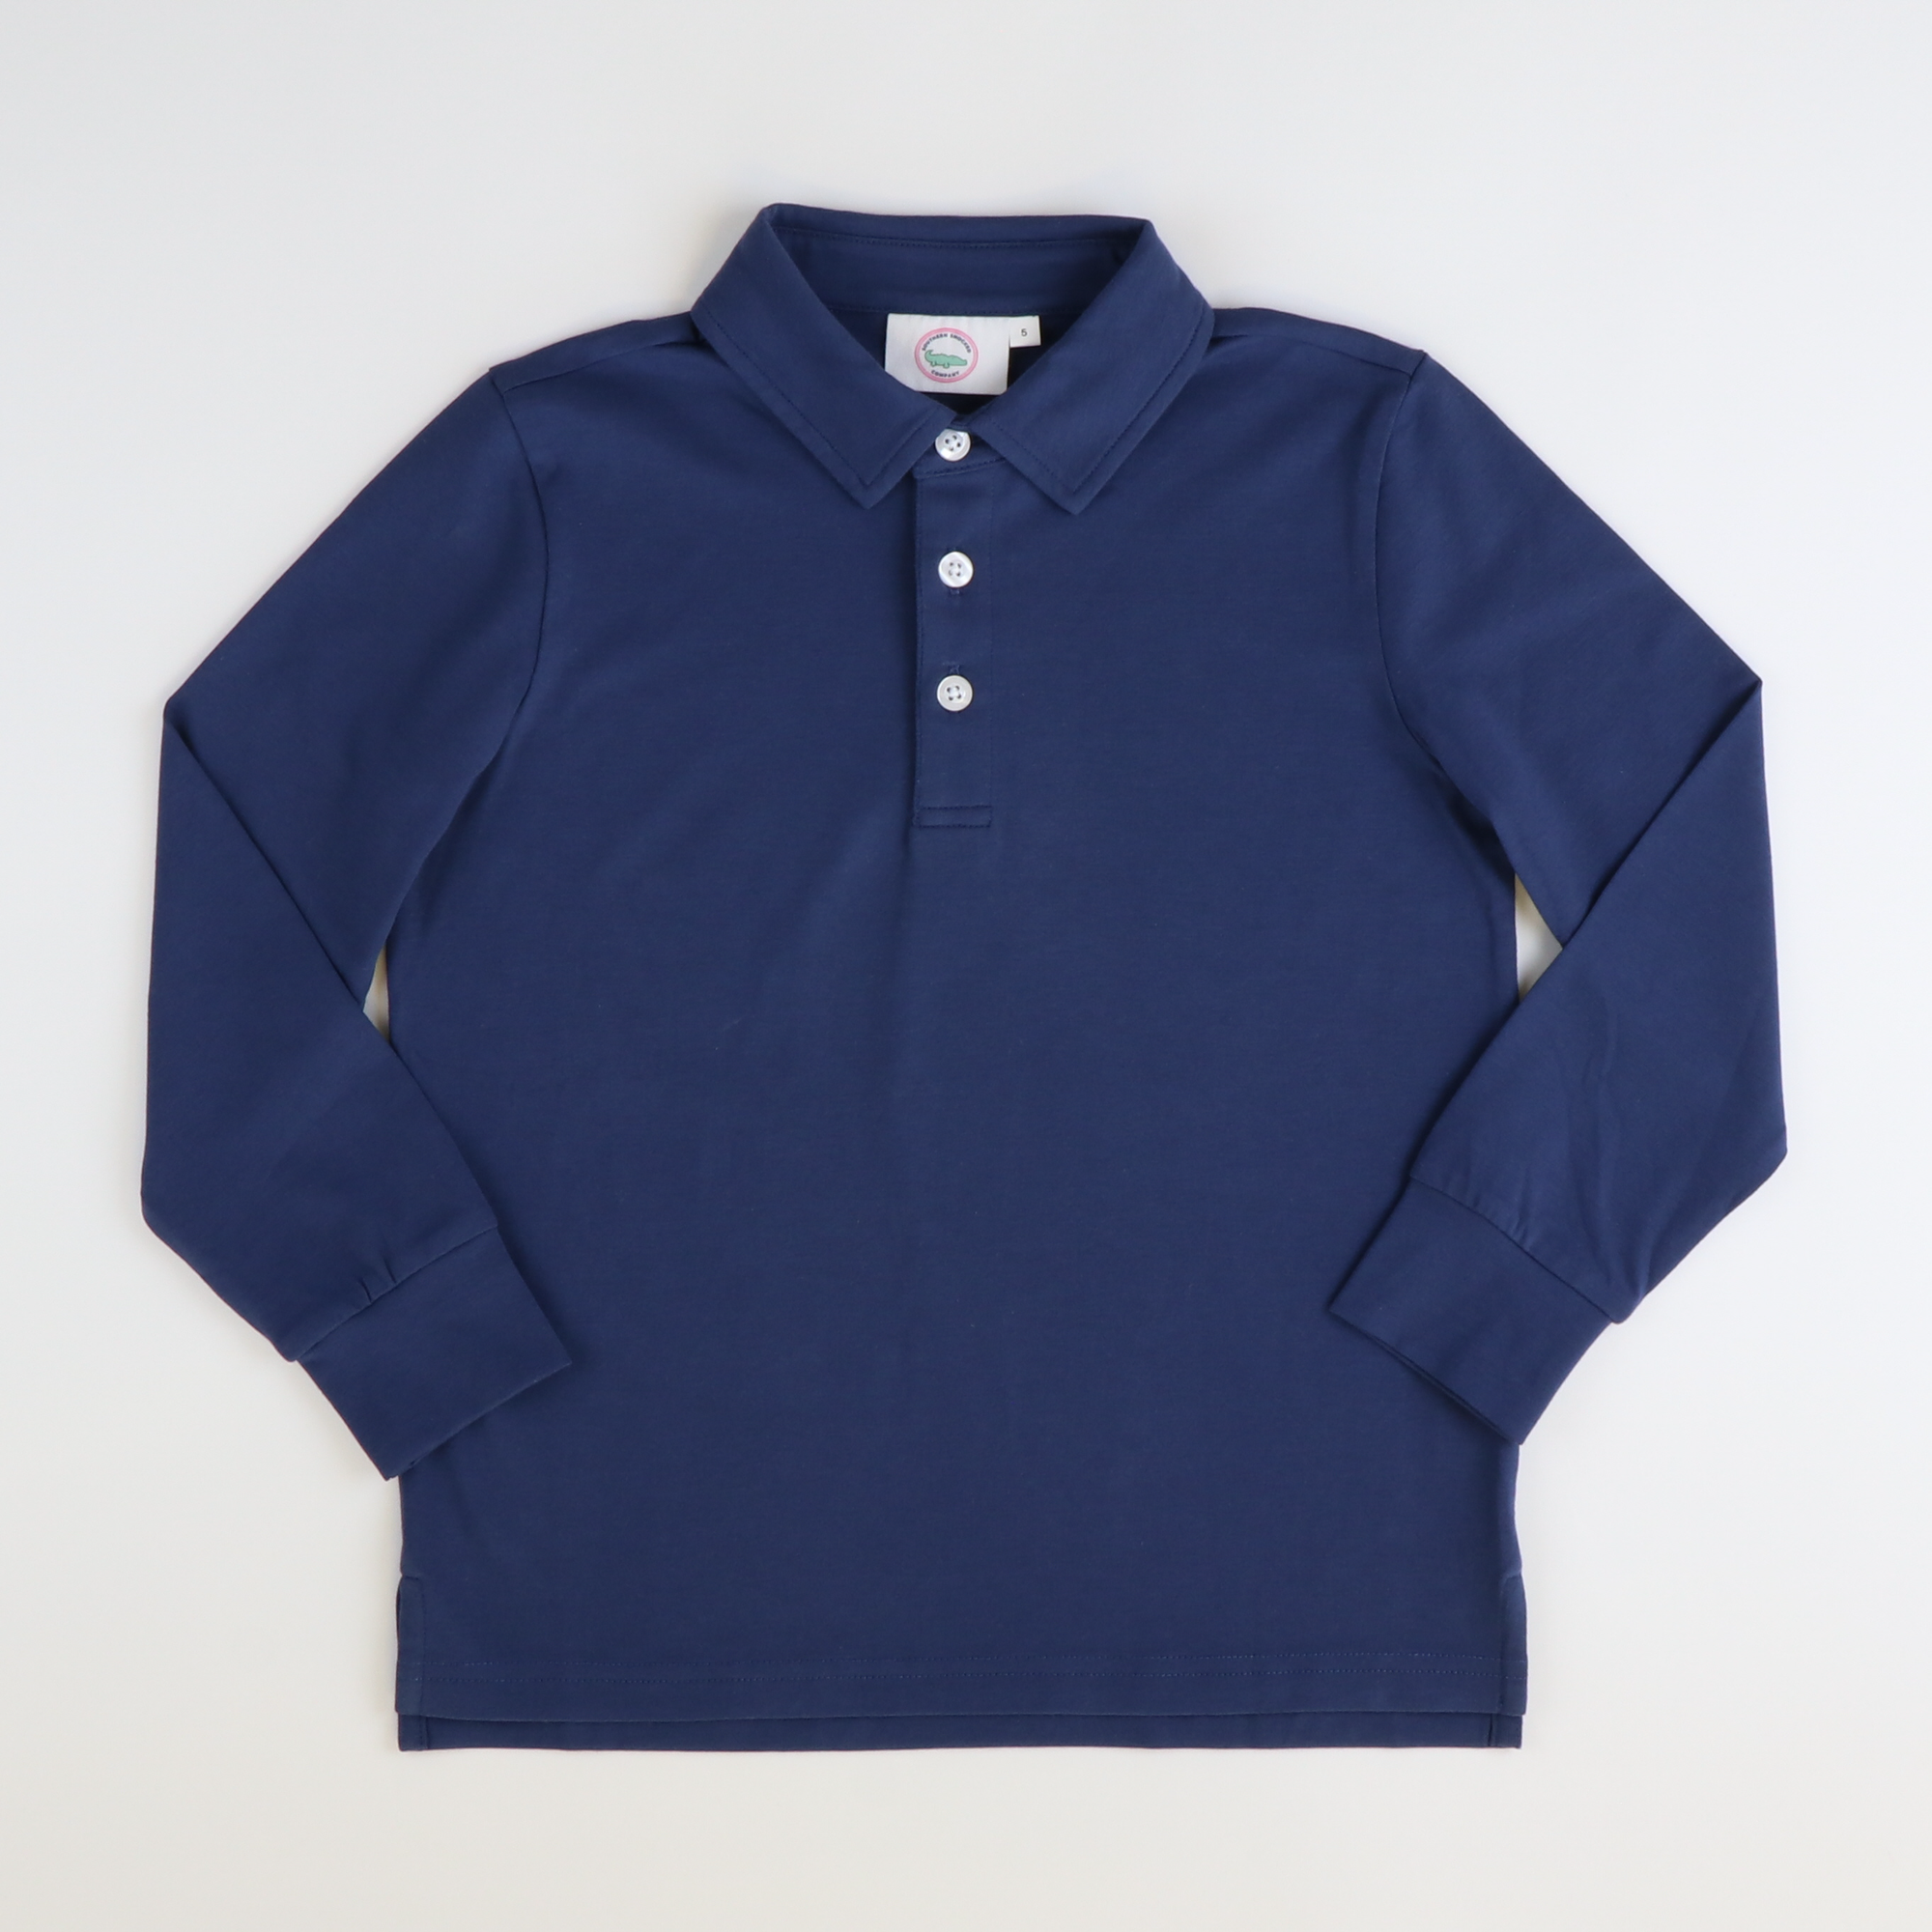 Boys Signature L/S Knit Polo - Navy Solid